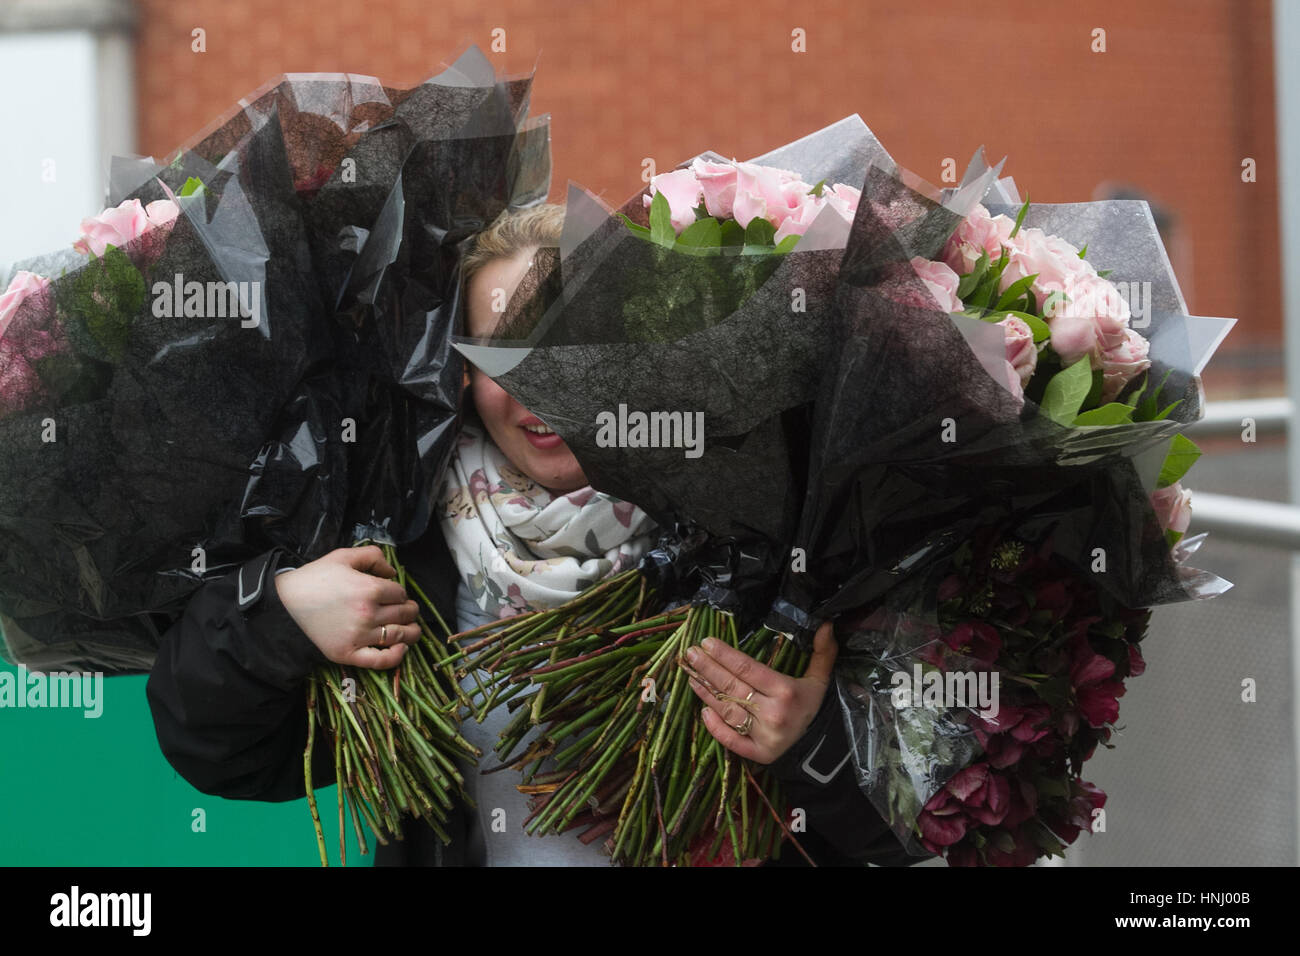 Wimbledon London UK. 14th February 2017. A florist carries large bouquets of flowers on Valentines Day, which is celebrated as most romantic day of the calendar when many people show affection by offering flowers to their loved ones Credit: amer ghazzal/Alamy Live News Stock Photo